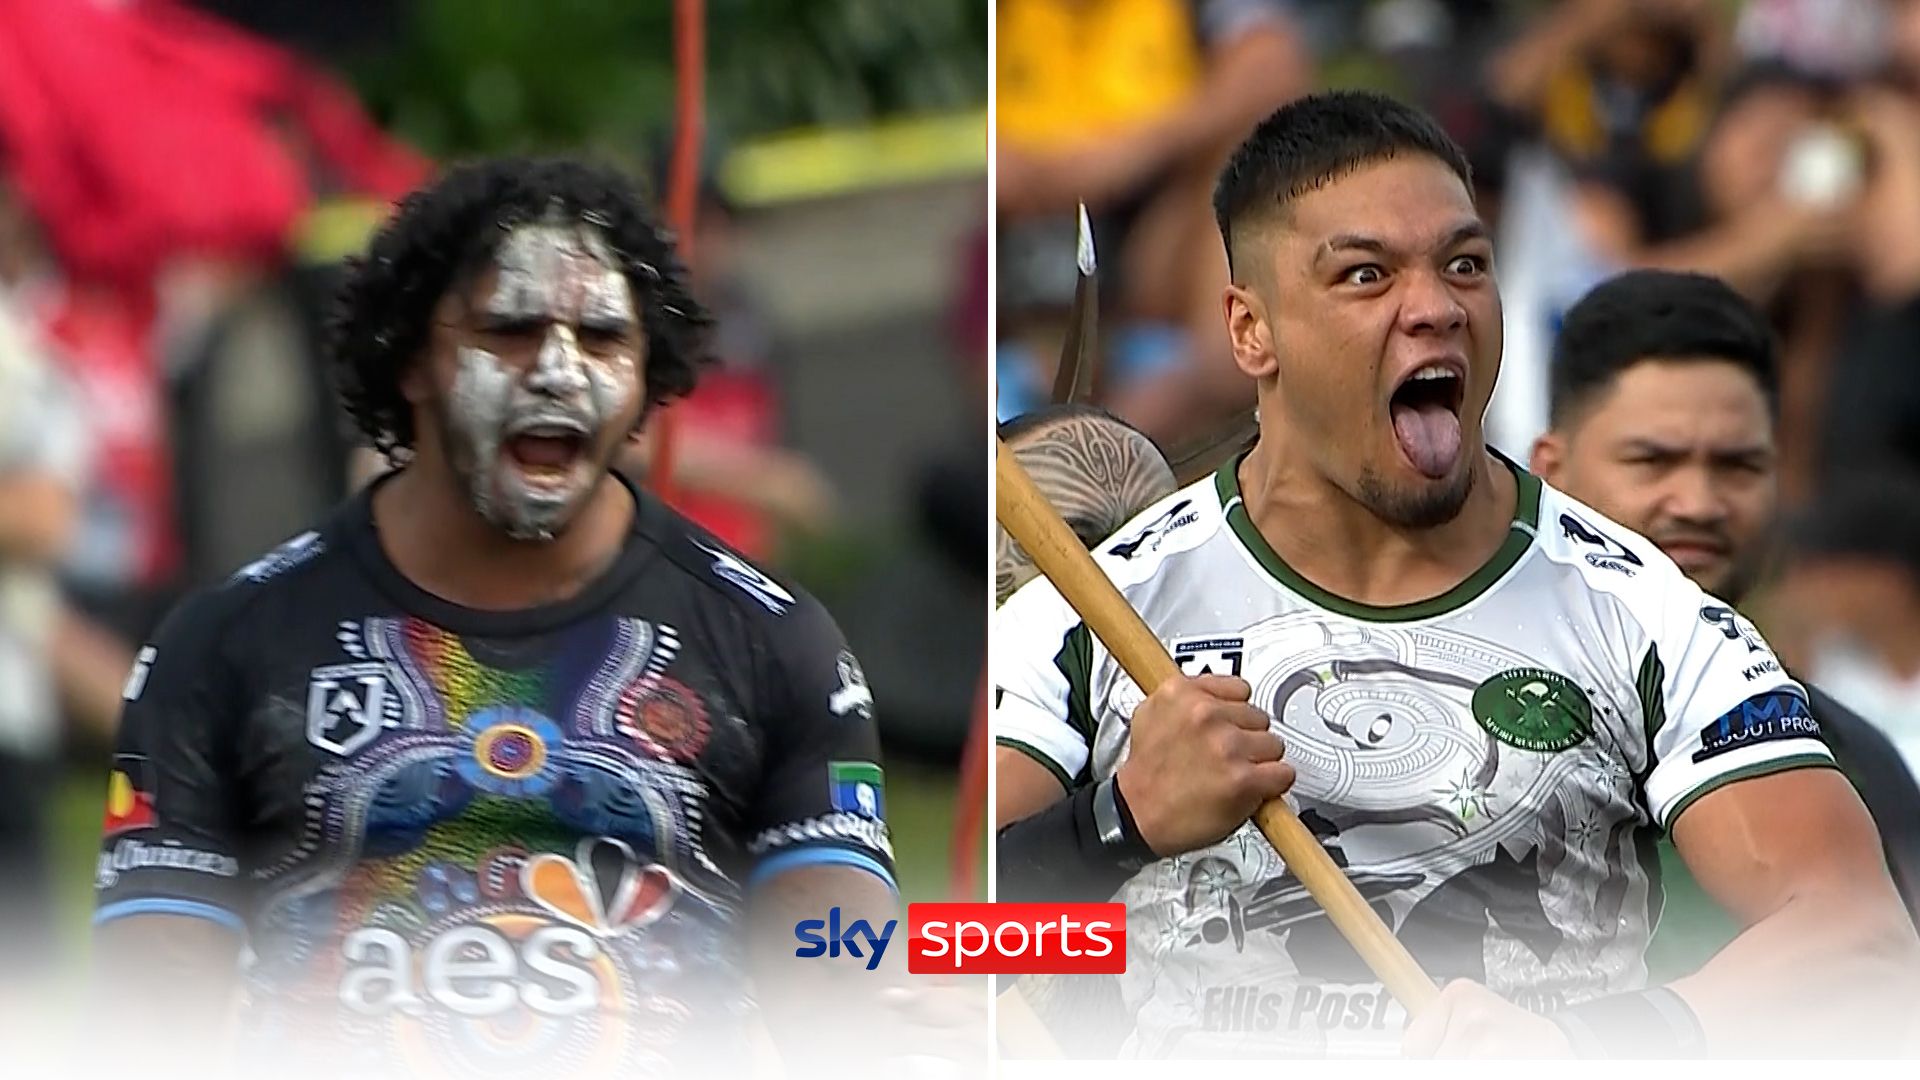 Maori All-Stars, Indigenous players deliver powerful pre-game Hakas